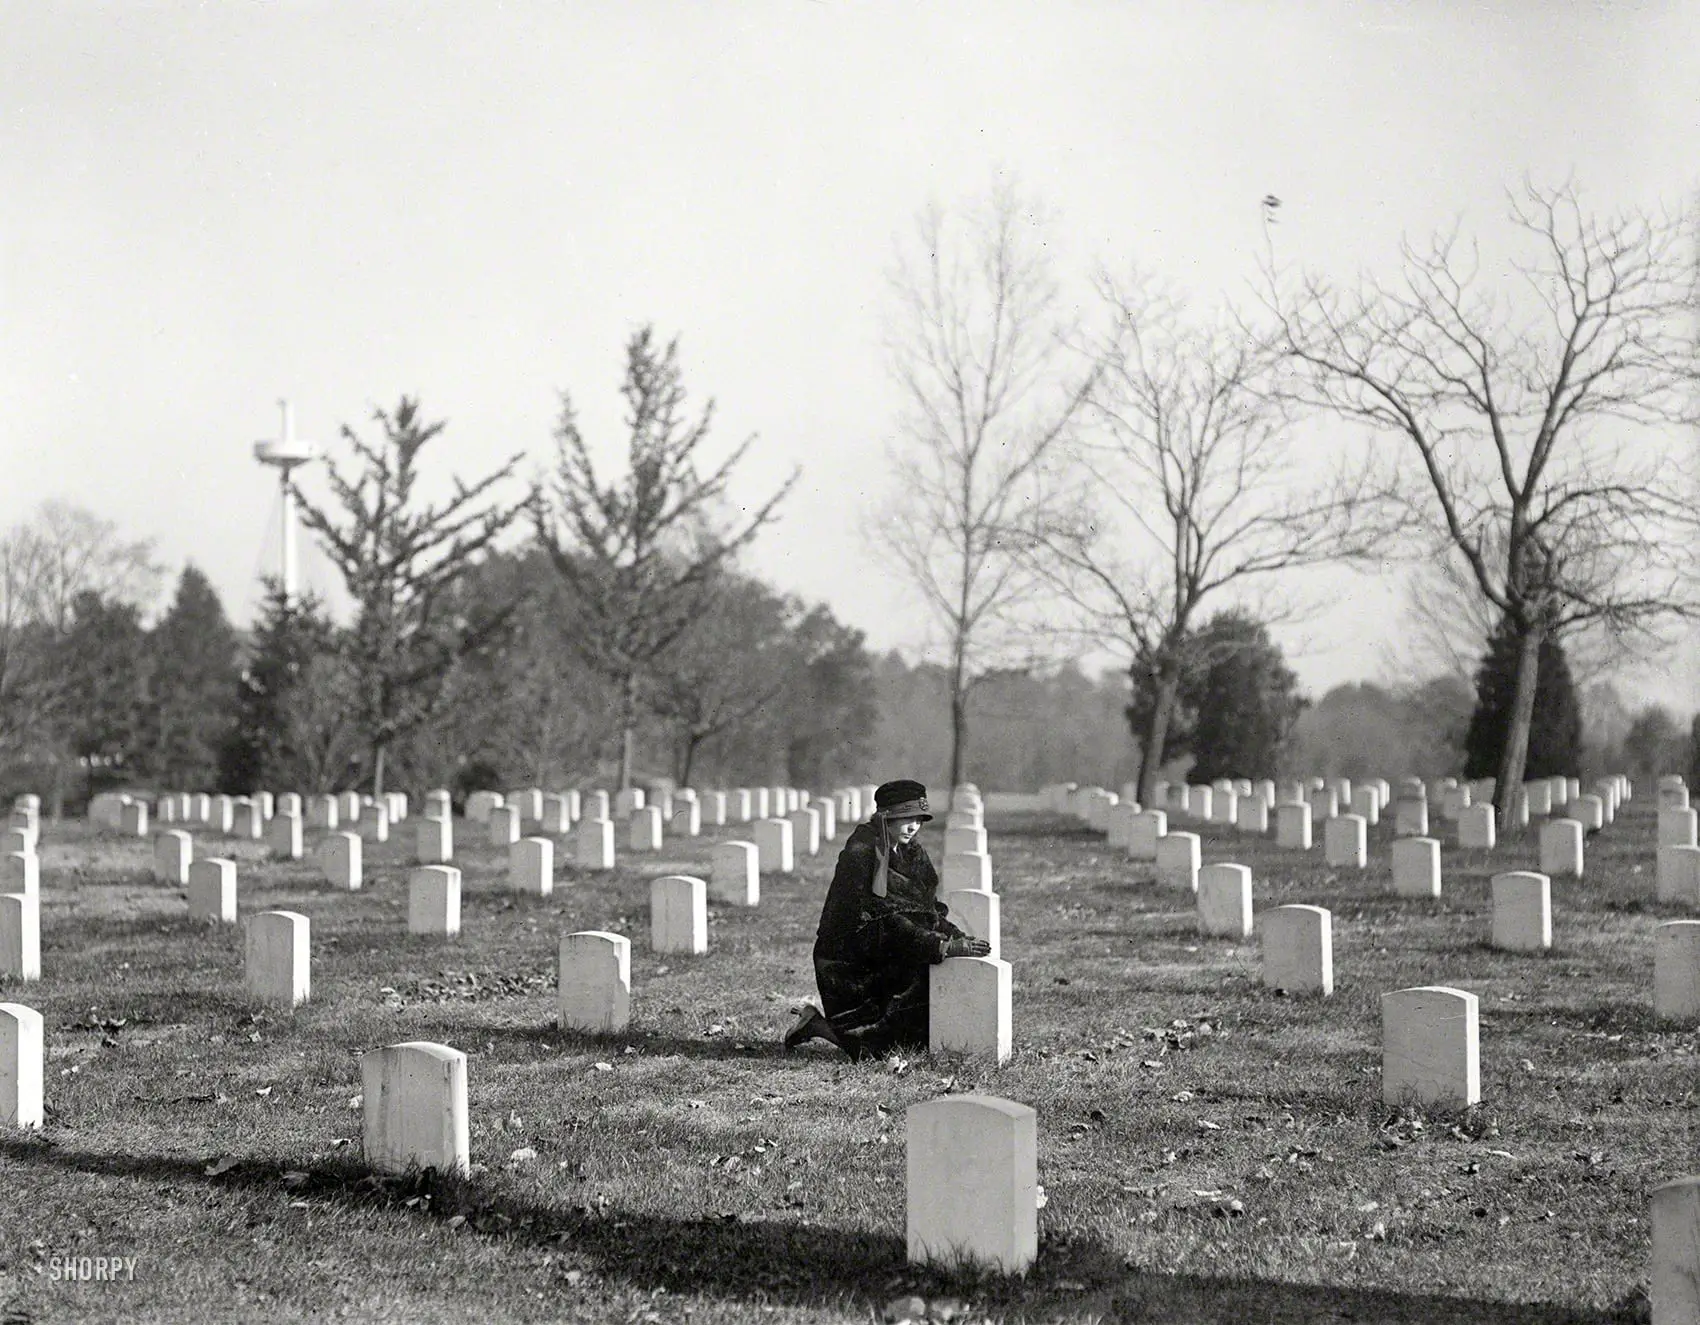 "Arlington National Cemetery, 1922." With the USS Maine Memorial rising at left. Harris & Ewing Collection glass negative.